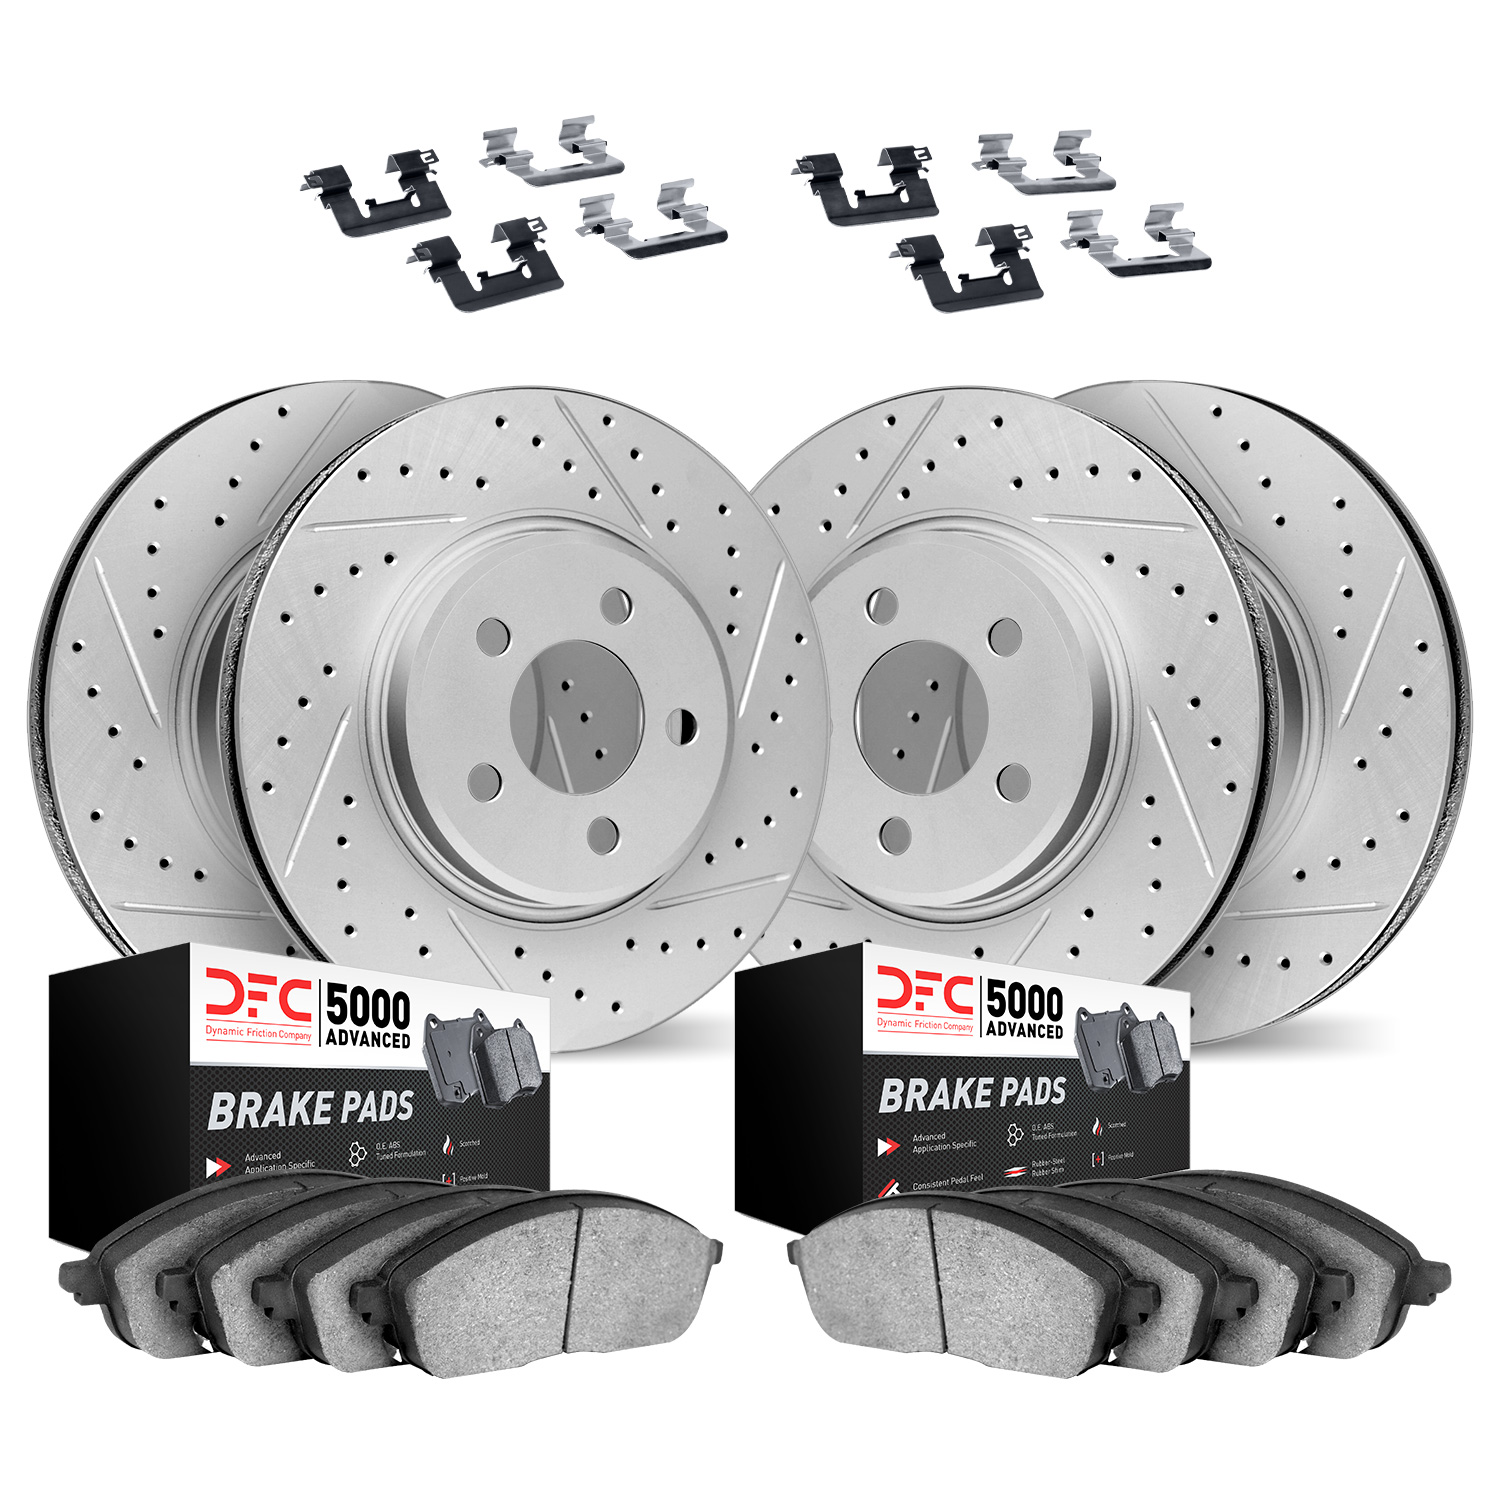 2514-31048 Geoperformance Drilled/Slotted Rotors w/5000 Advanced Brake Pads Kit & Hardware, 2011-2014 BMW, Position: Front and R